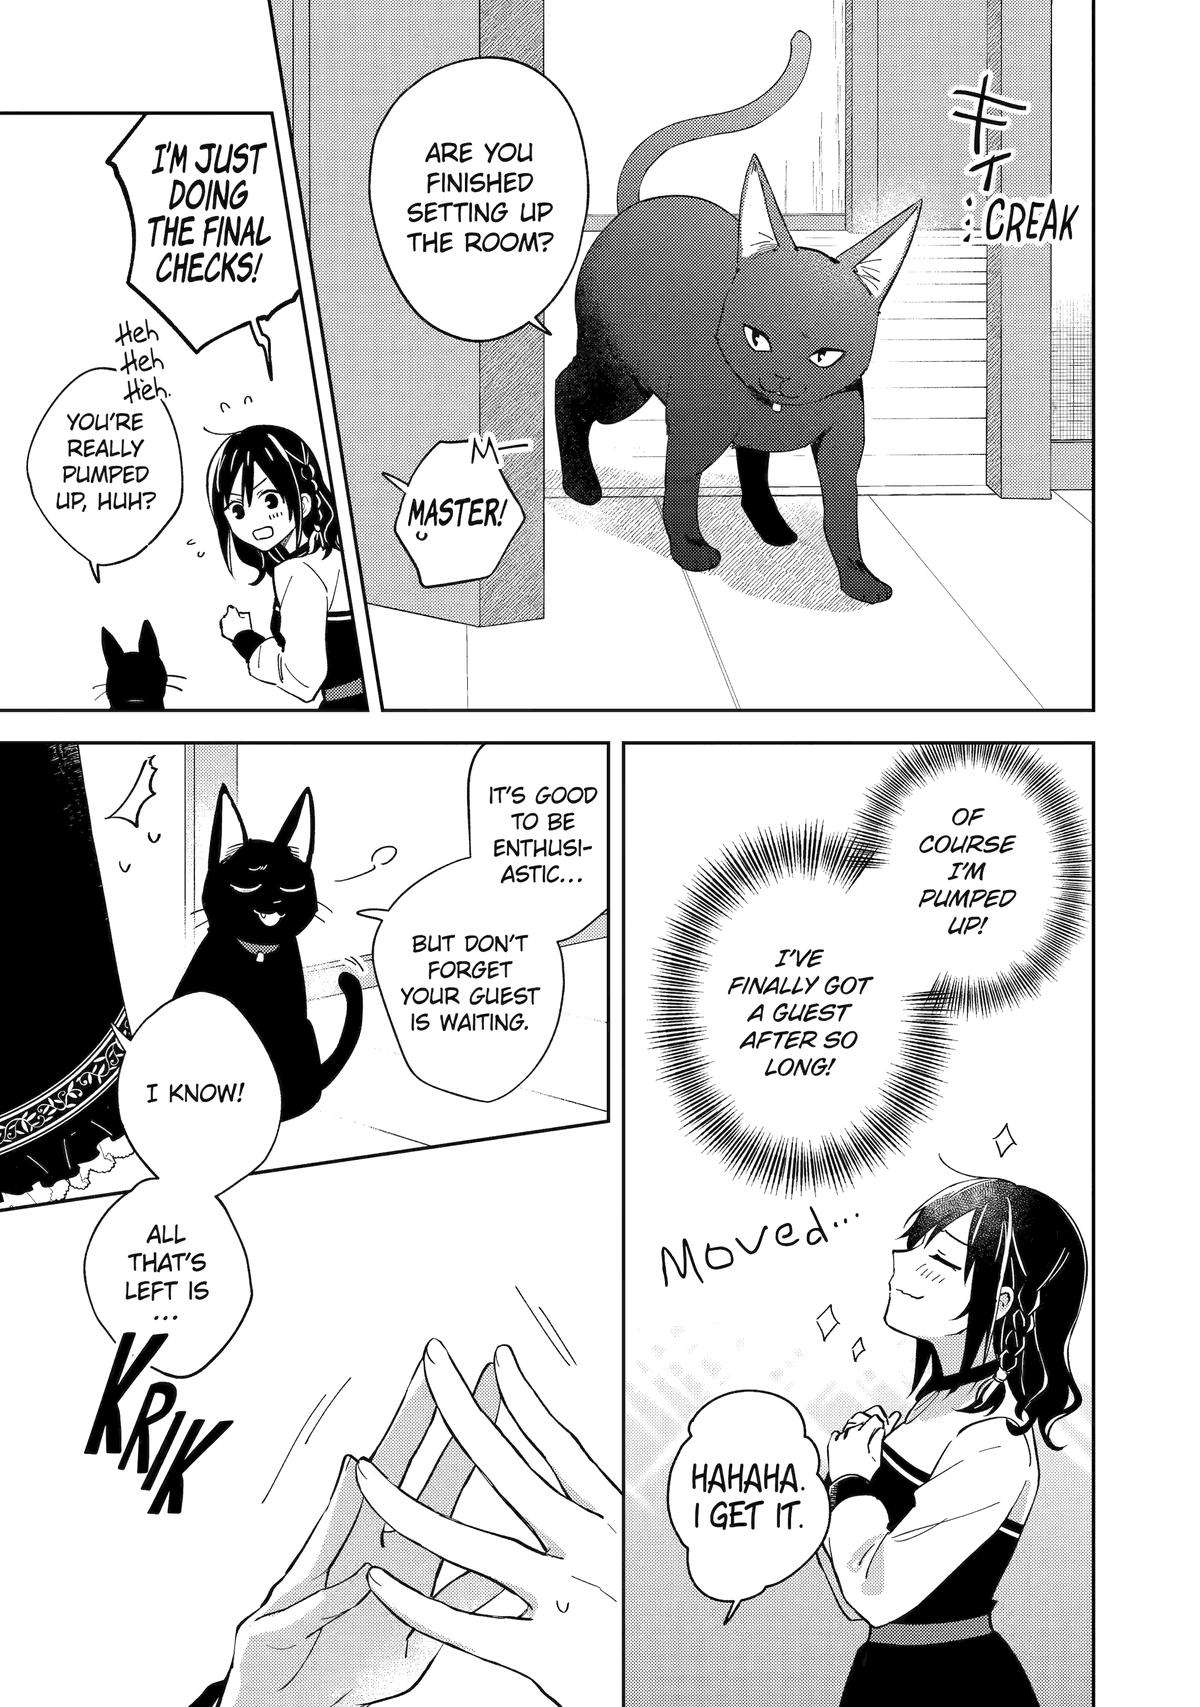 The Black Witch Runs Her Own Boarding House in Another World - chapter 2 - #3